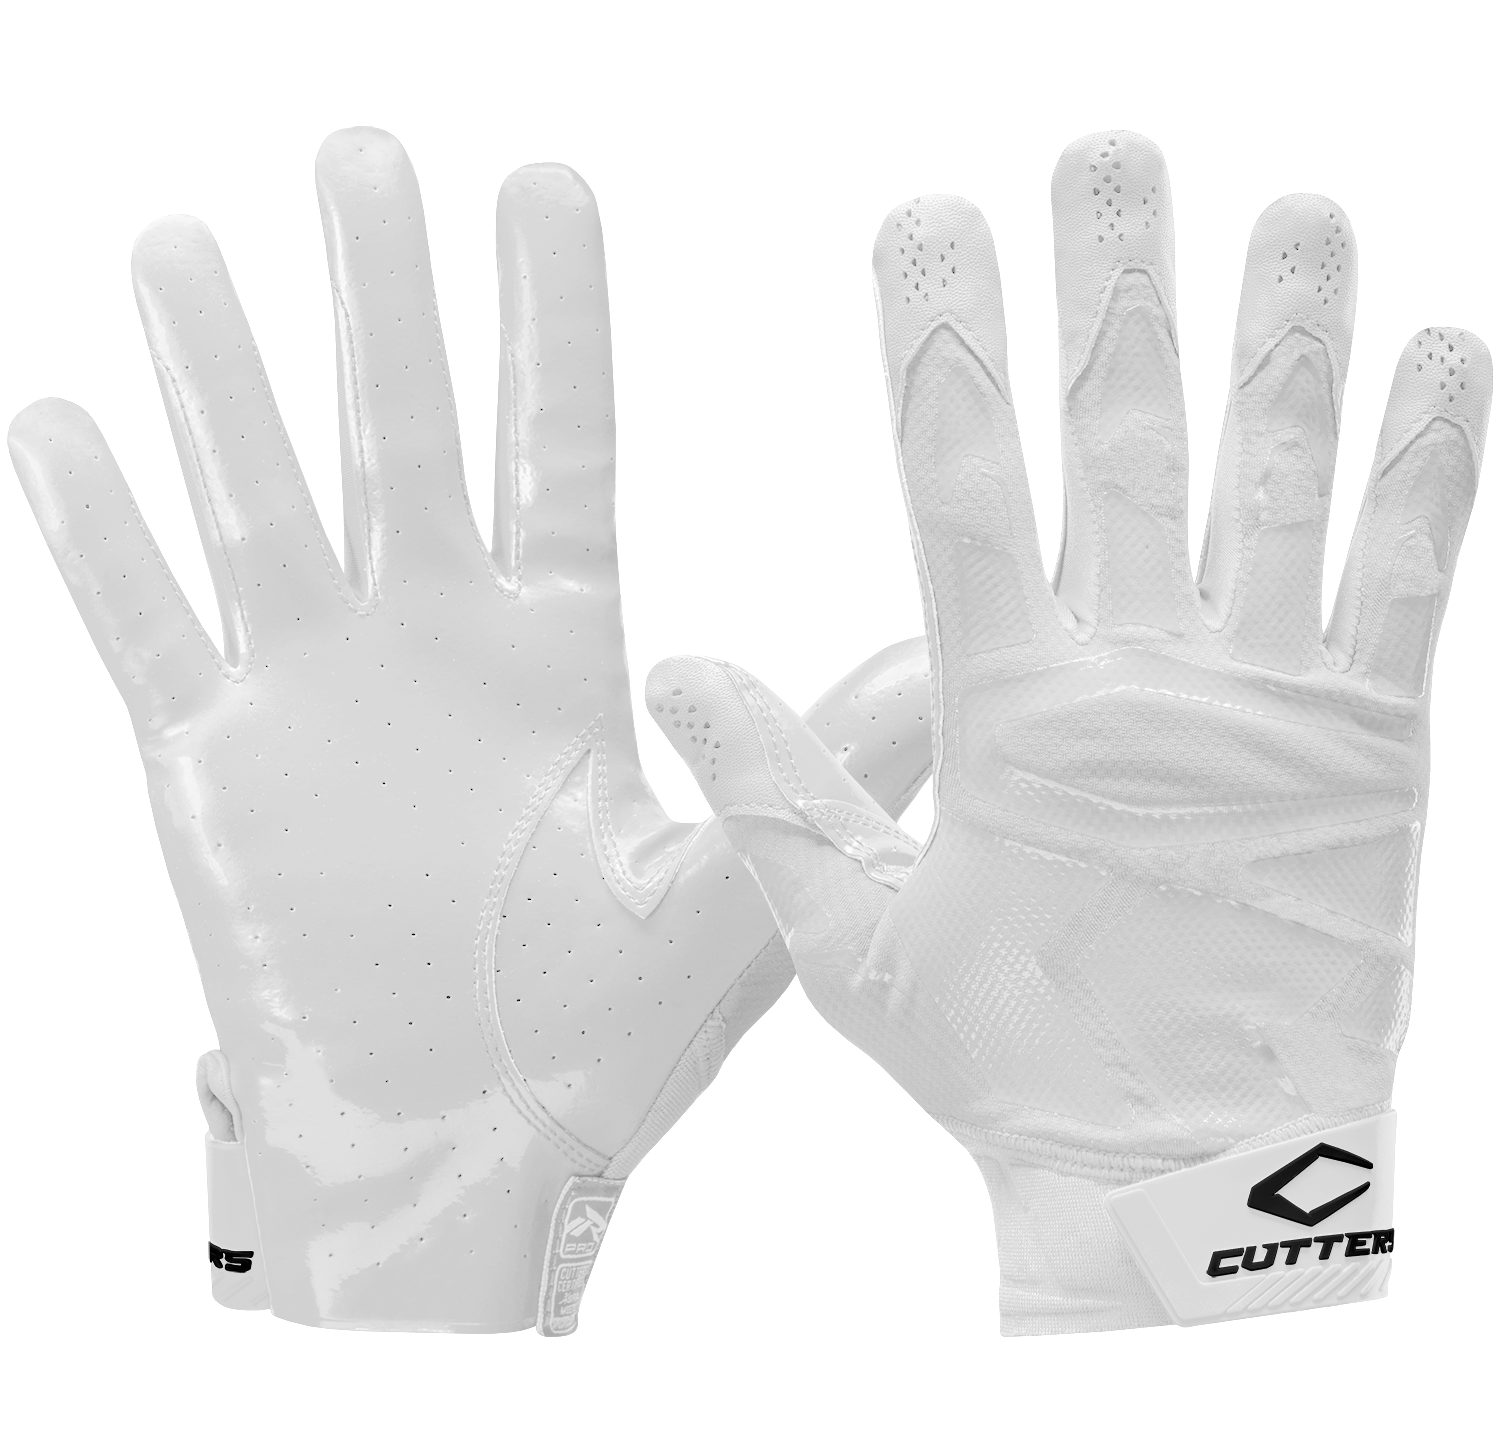 Cutters Gloves Youth Rev Pro Receiver Glove Pair